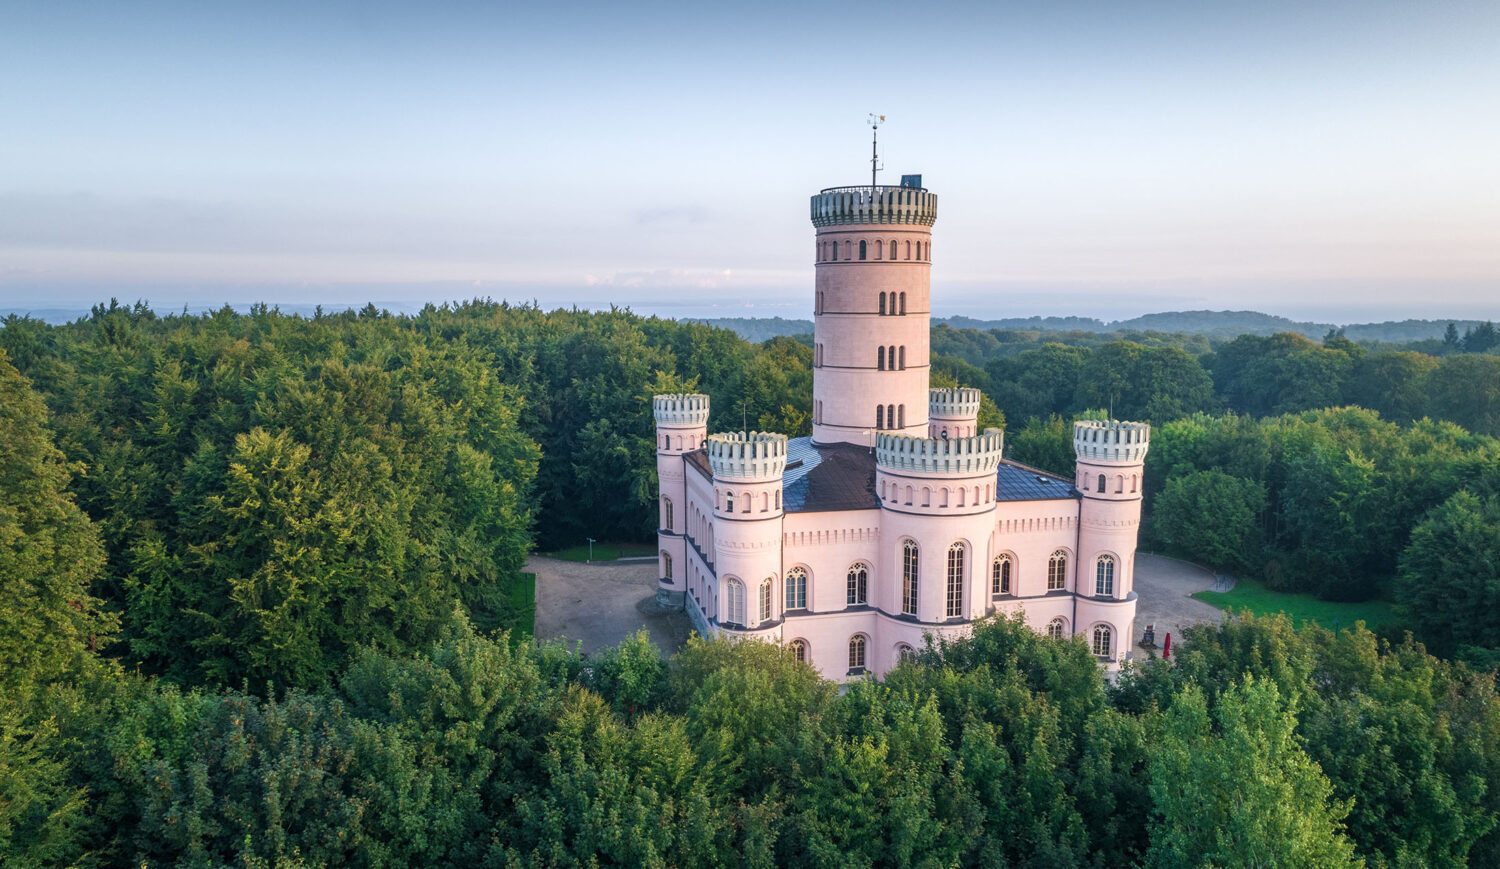 Granitz hunting lodge is located on the wooded ridge of the same name in the east of the island of Rügen